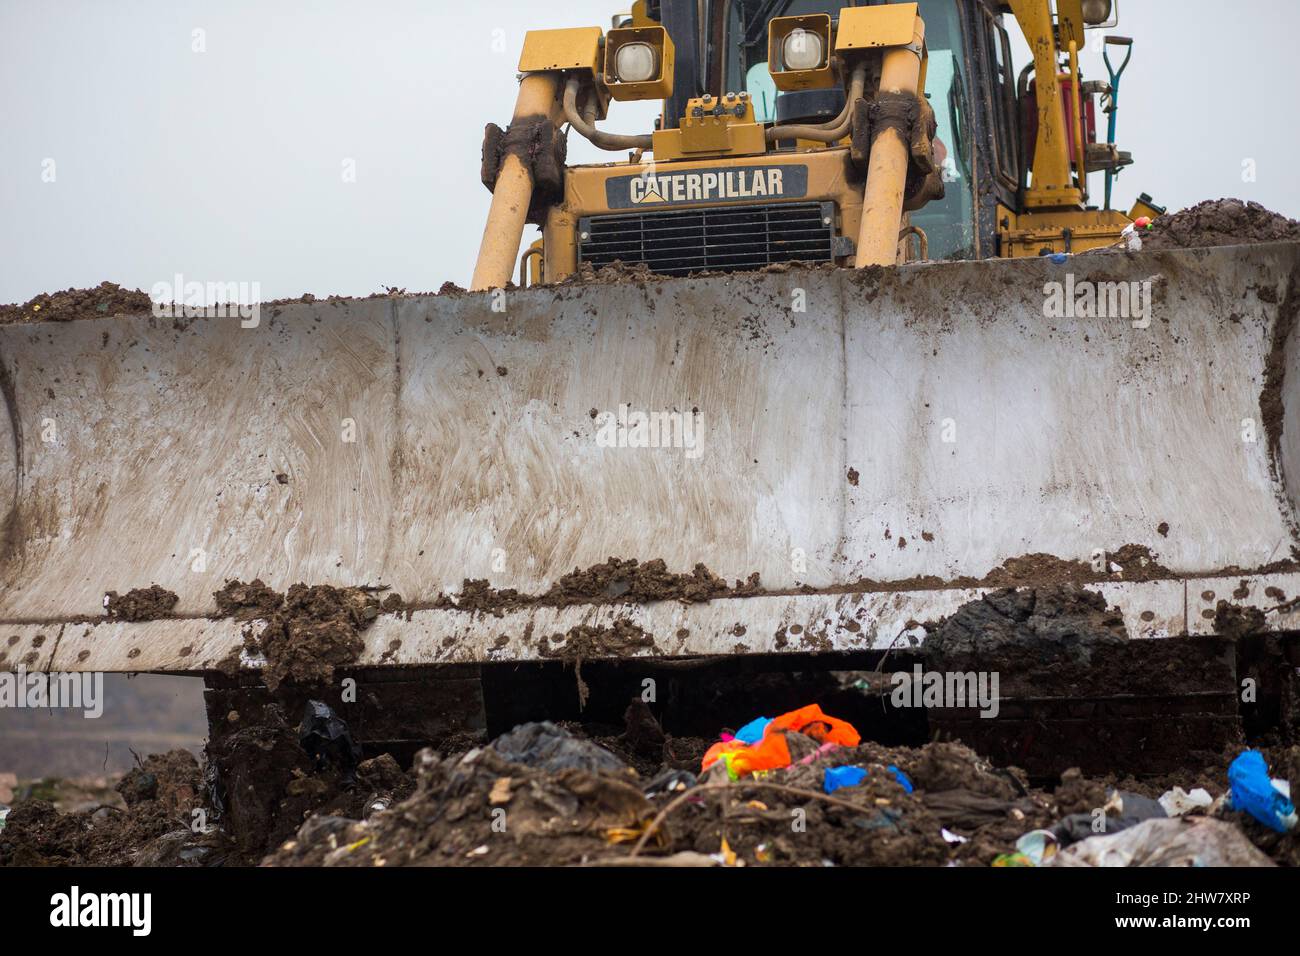 A Caterpillar bulldozer blade and tracks compact household waste on a UK waste disposal site. Stock Photo